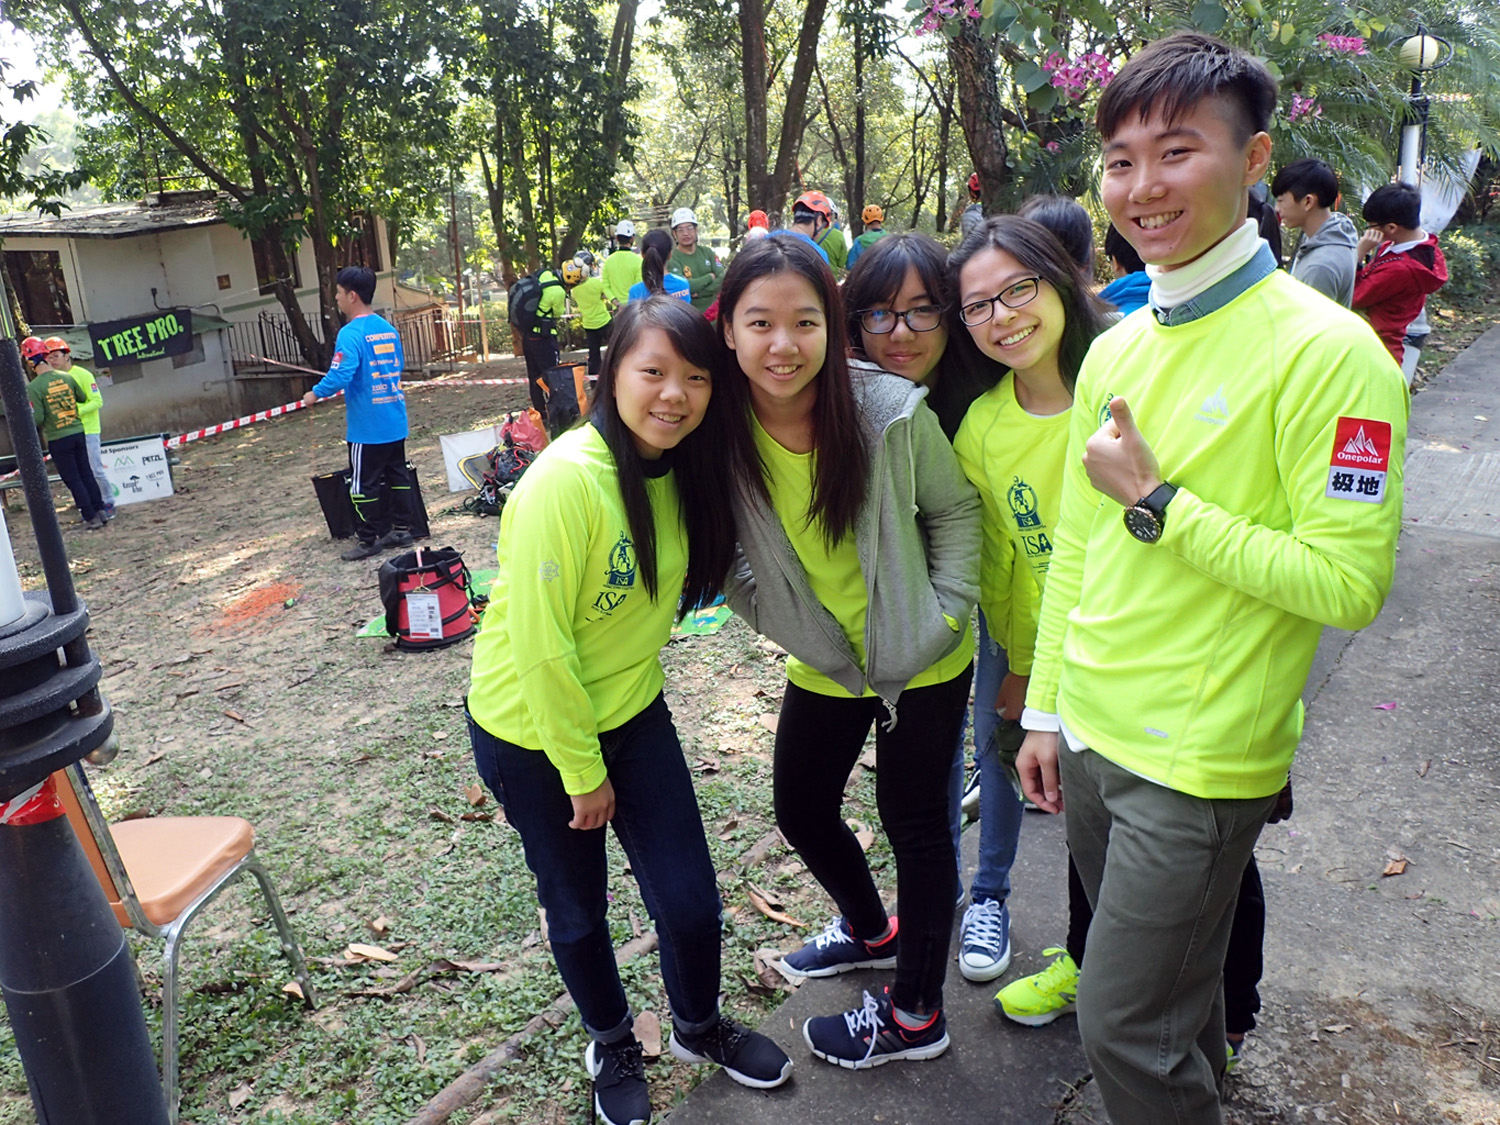 CIE Students enjoyed the volunteering experience in the Tree Climbing Championship.